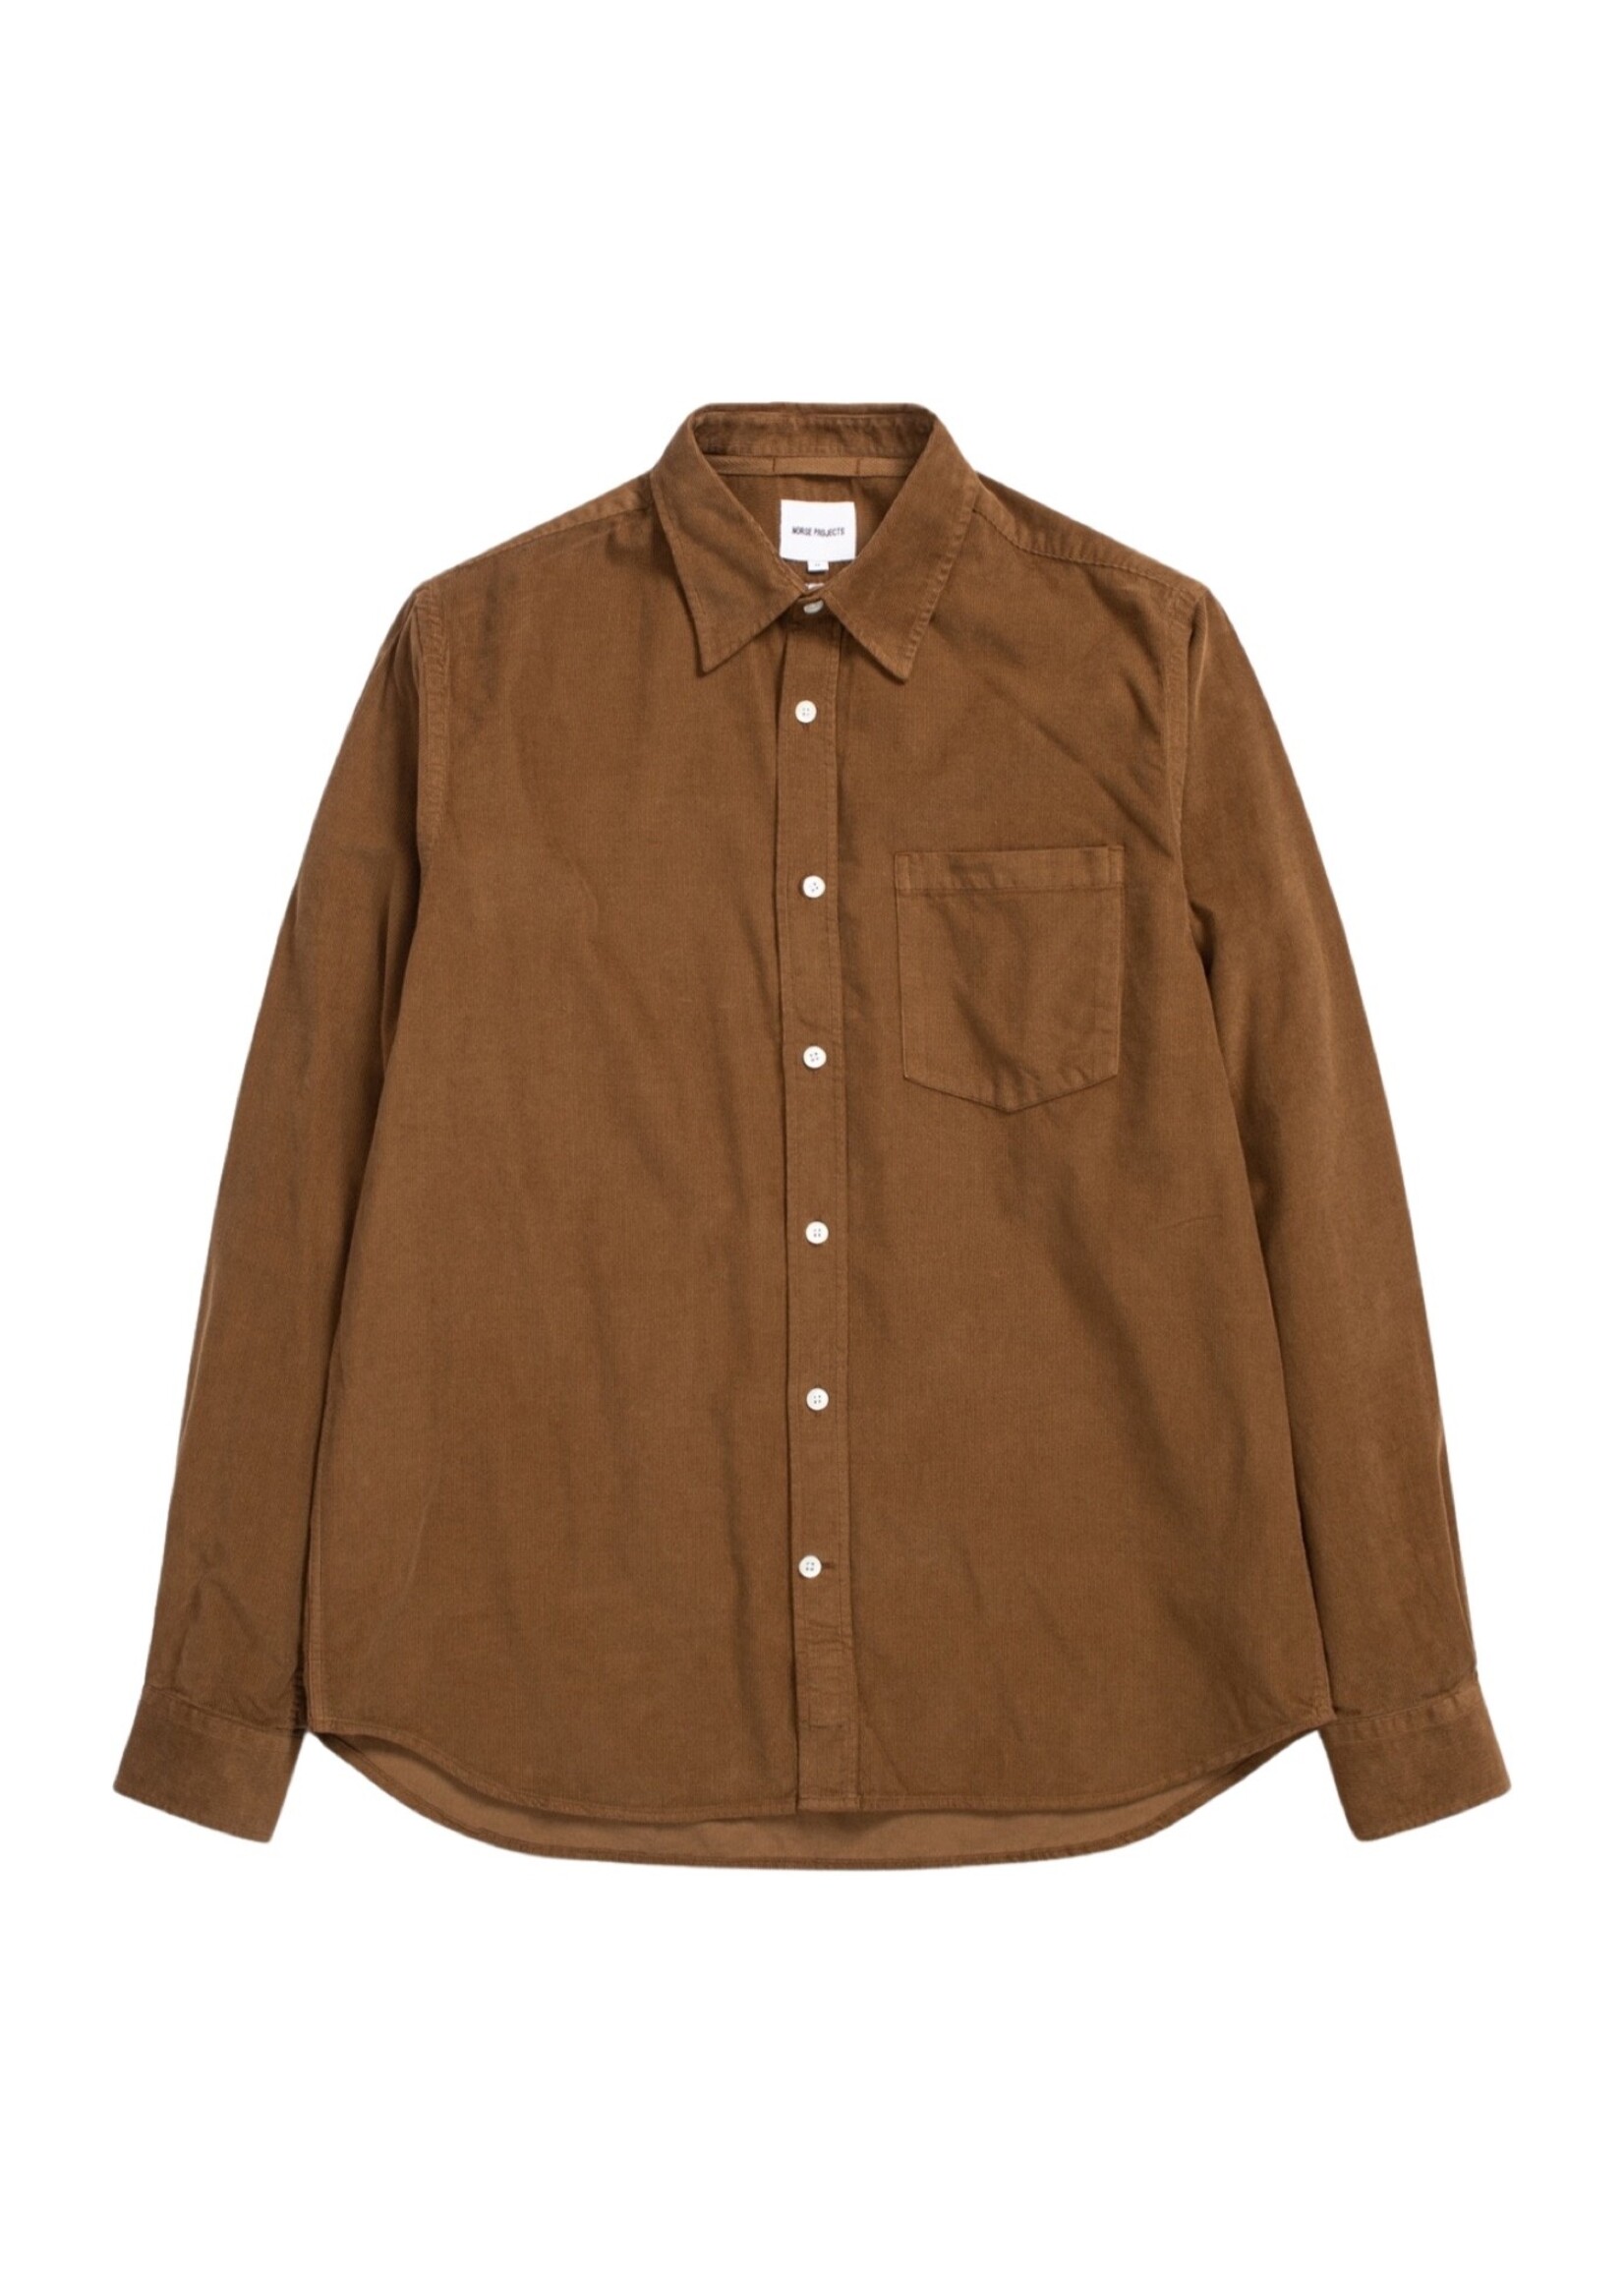 NORSE PROJECTS OSVALD MICRO CORDUROY SHIRT